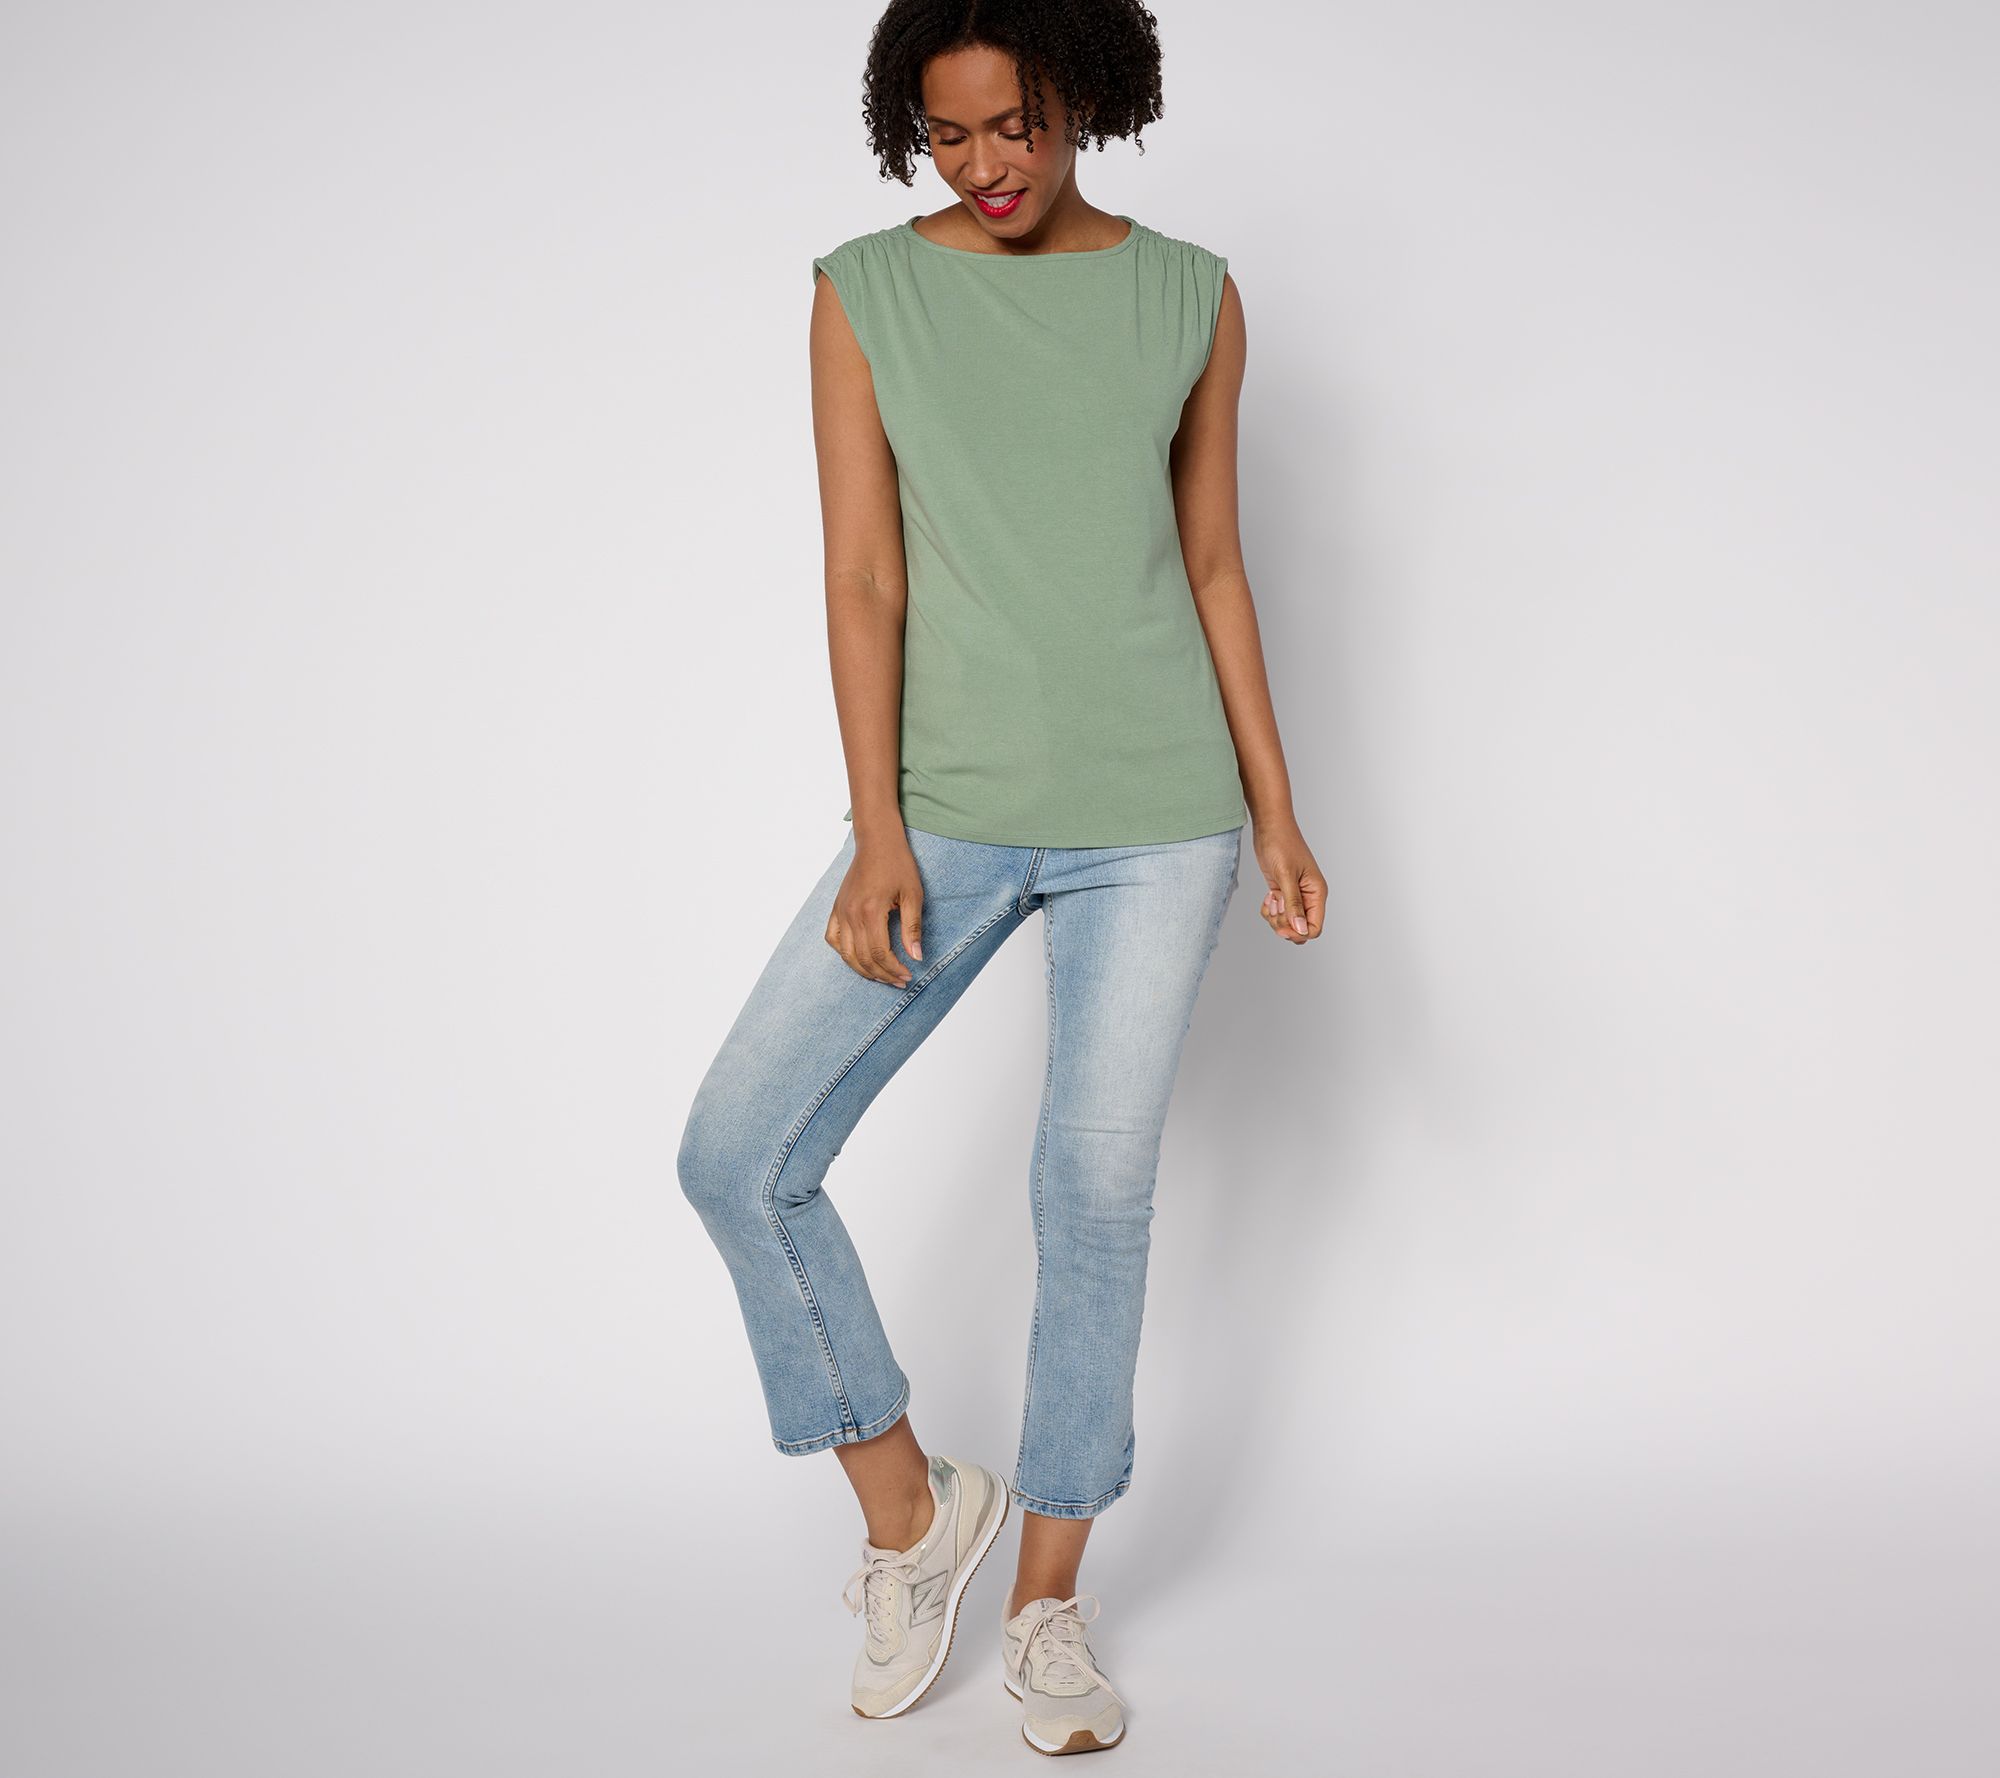 QUEZHU Flowy Tank Top Is a Must for Everyone's Year-Round Wardrobe